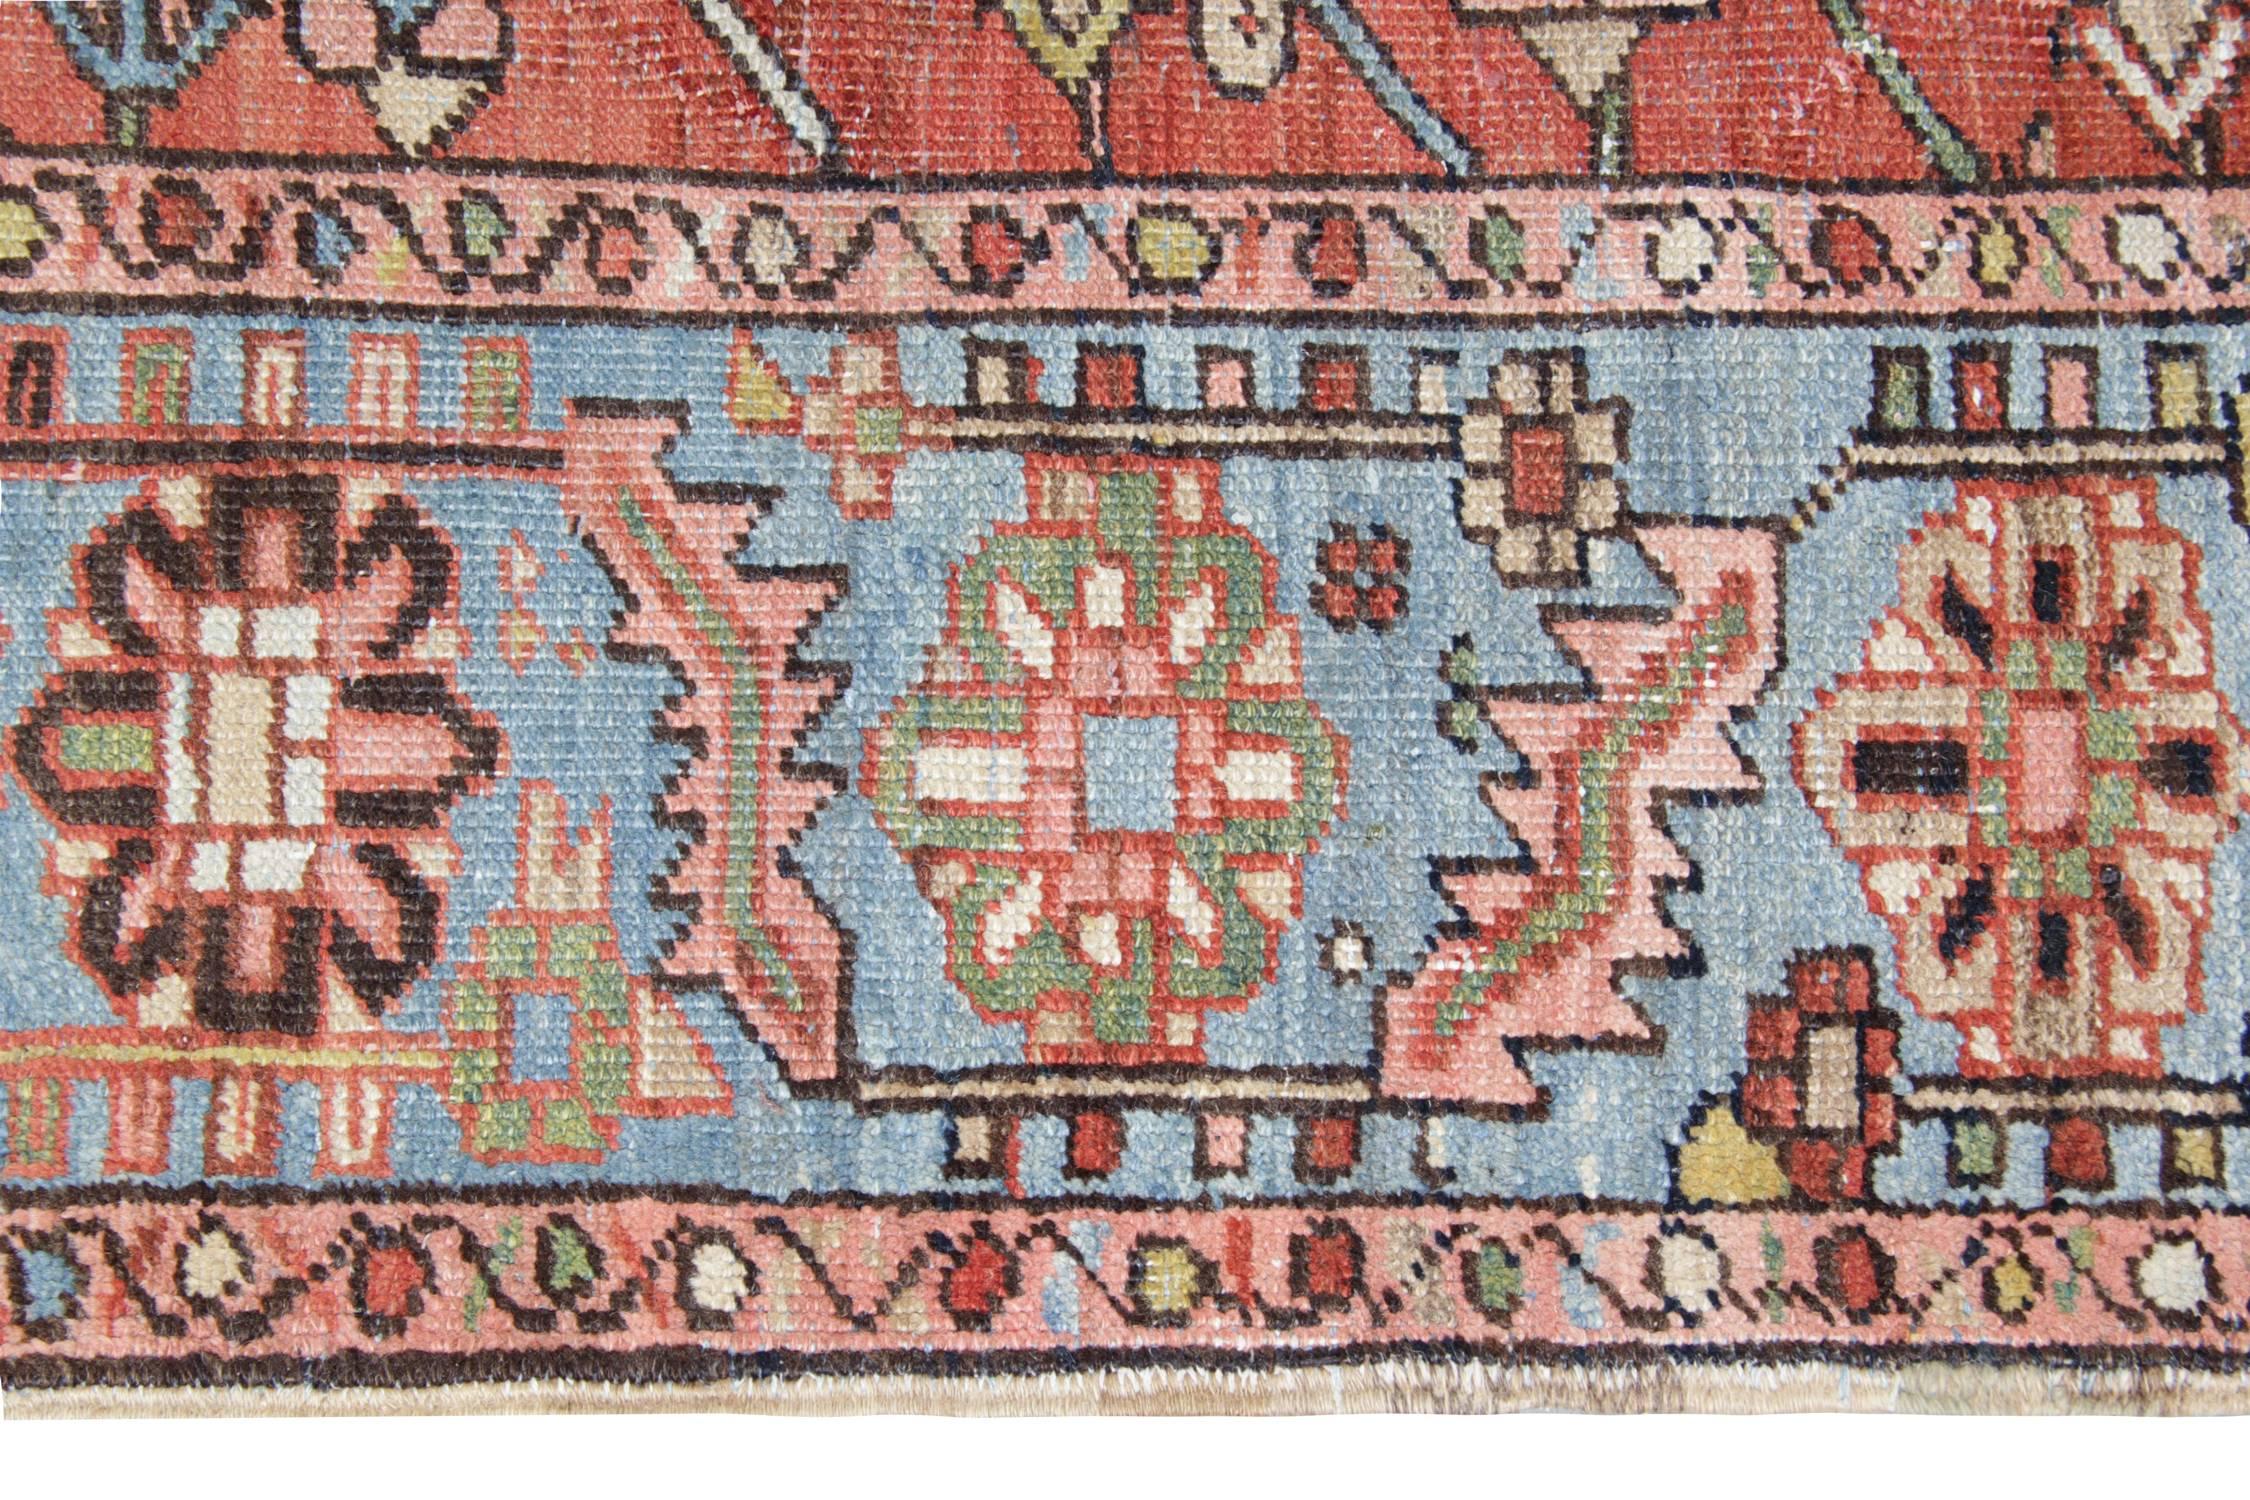 Late 19th Century Antique Persian Rugs Carpet Rug from Heriz